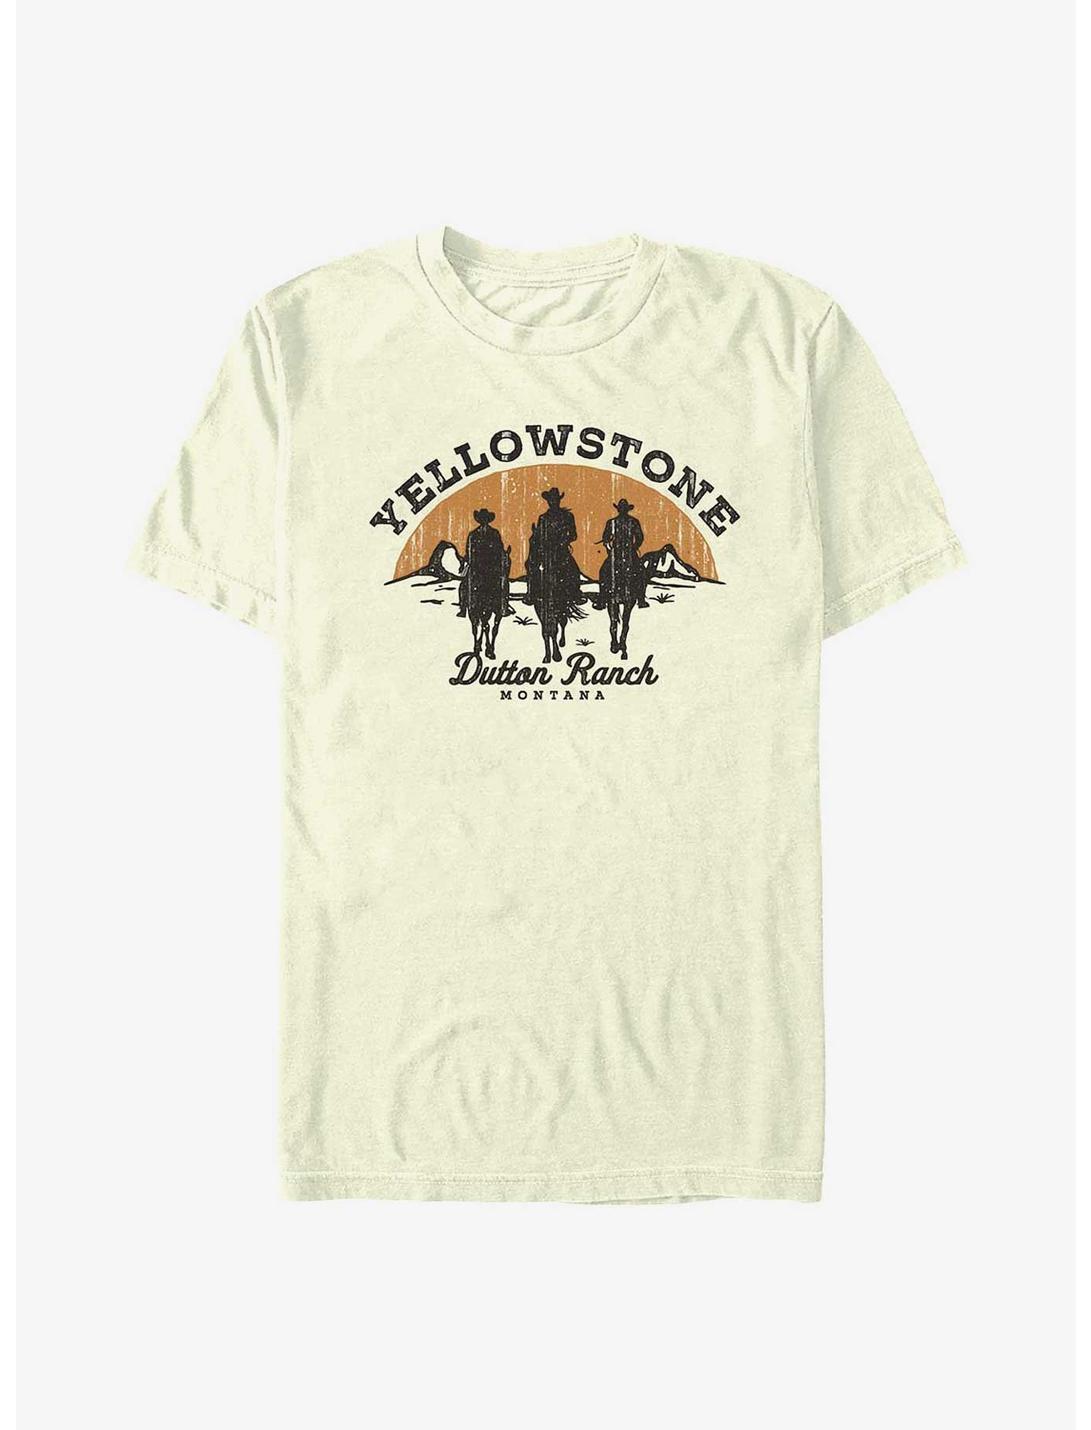 Yellowstone Riding Into The Sunset T-Shirt, NATURAL, hi-res